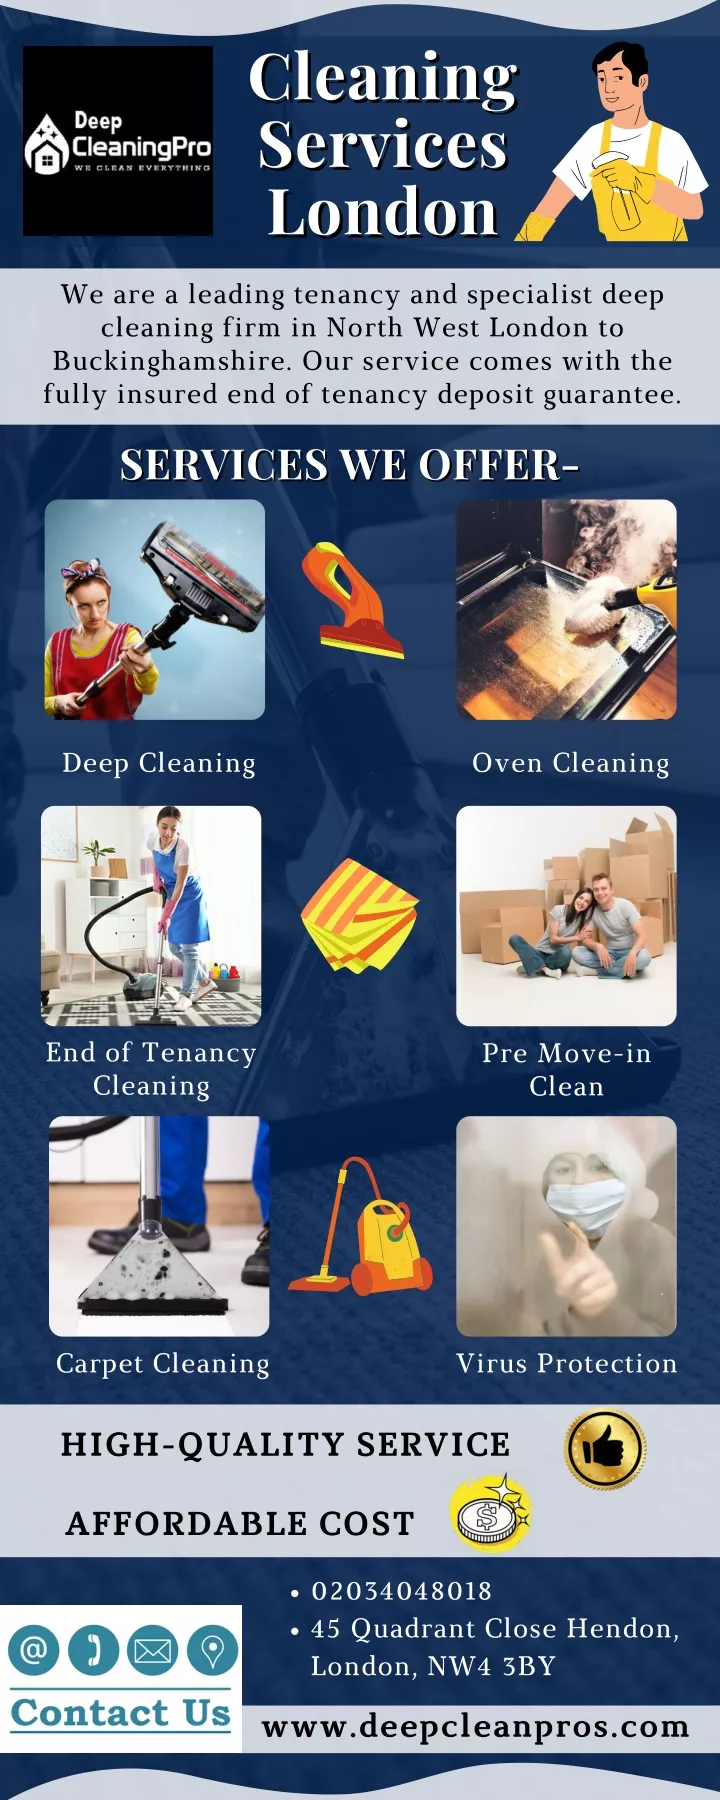 cleaning cleaning services services london london